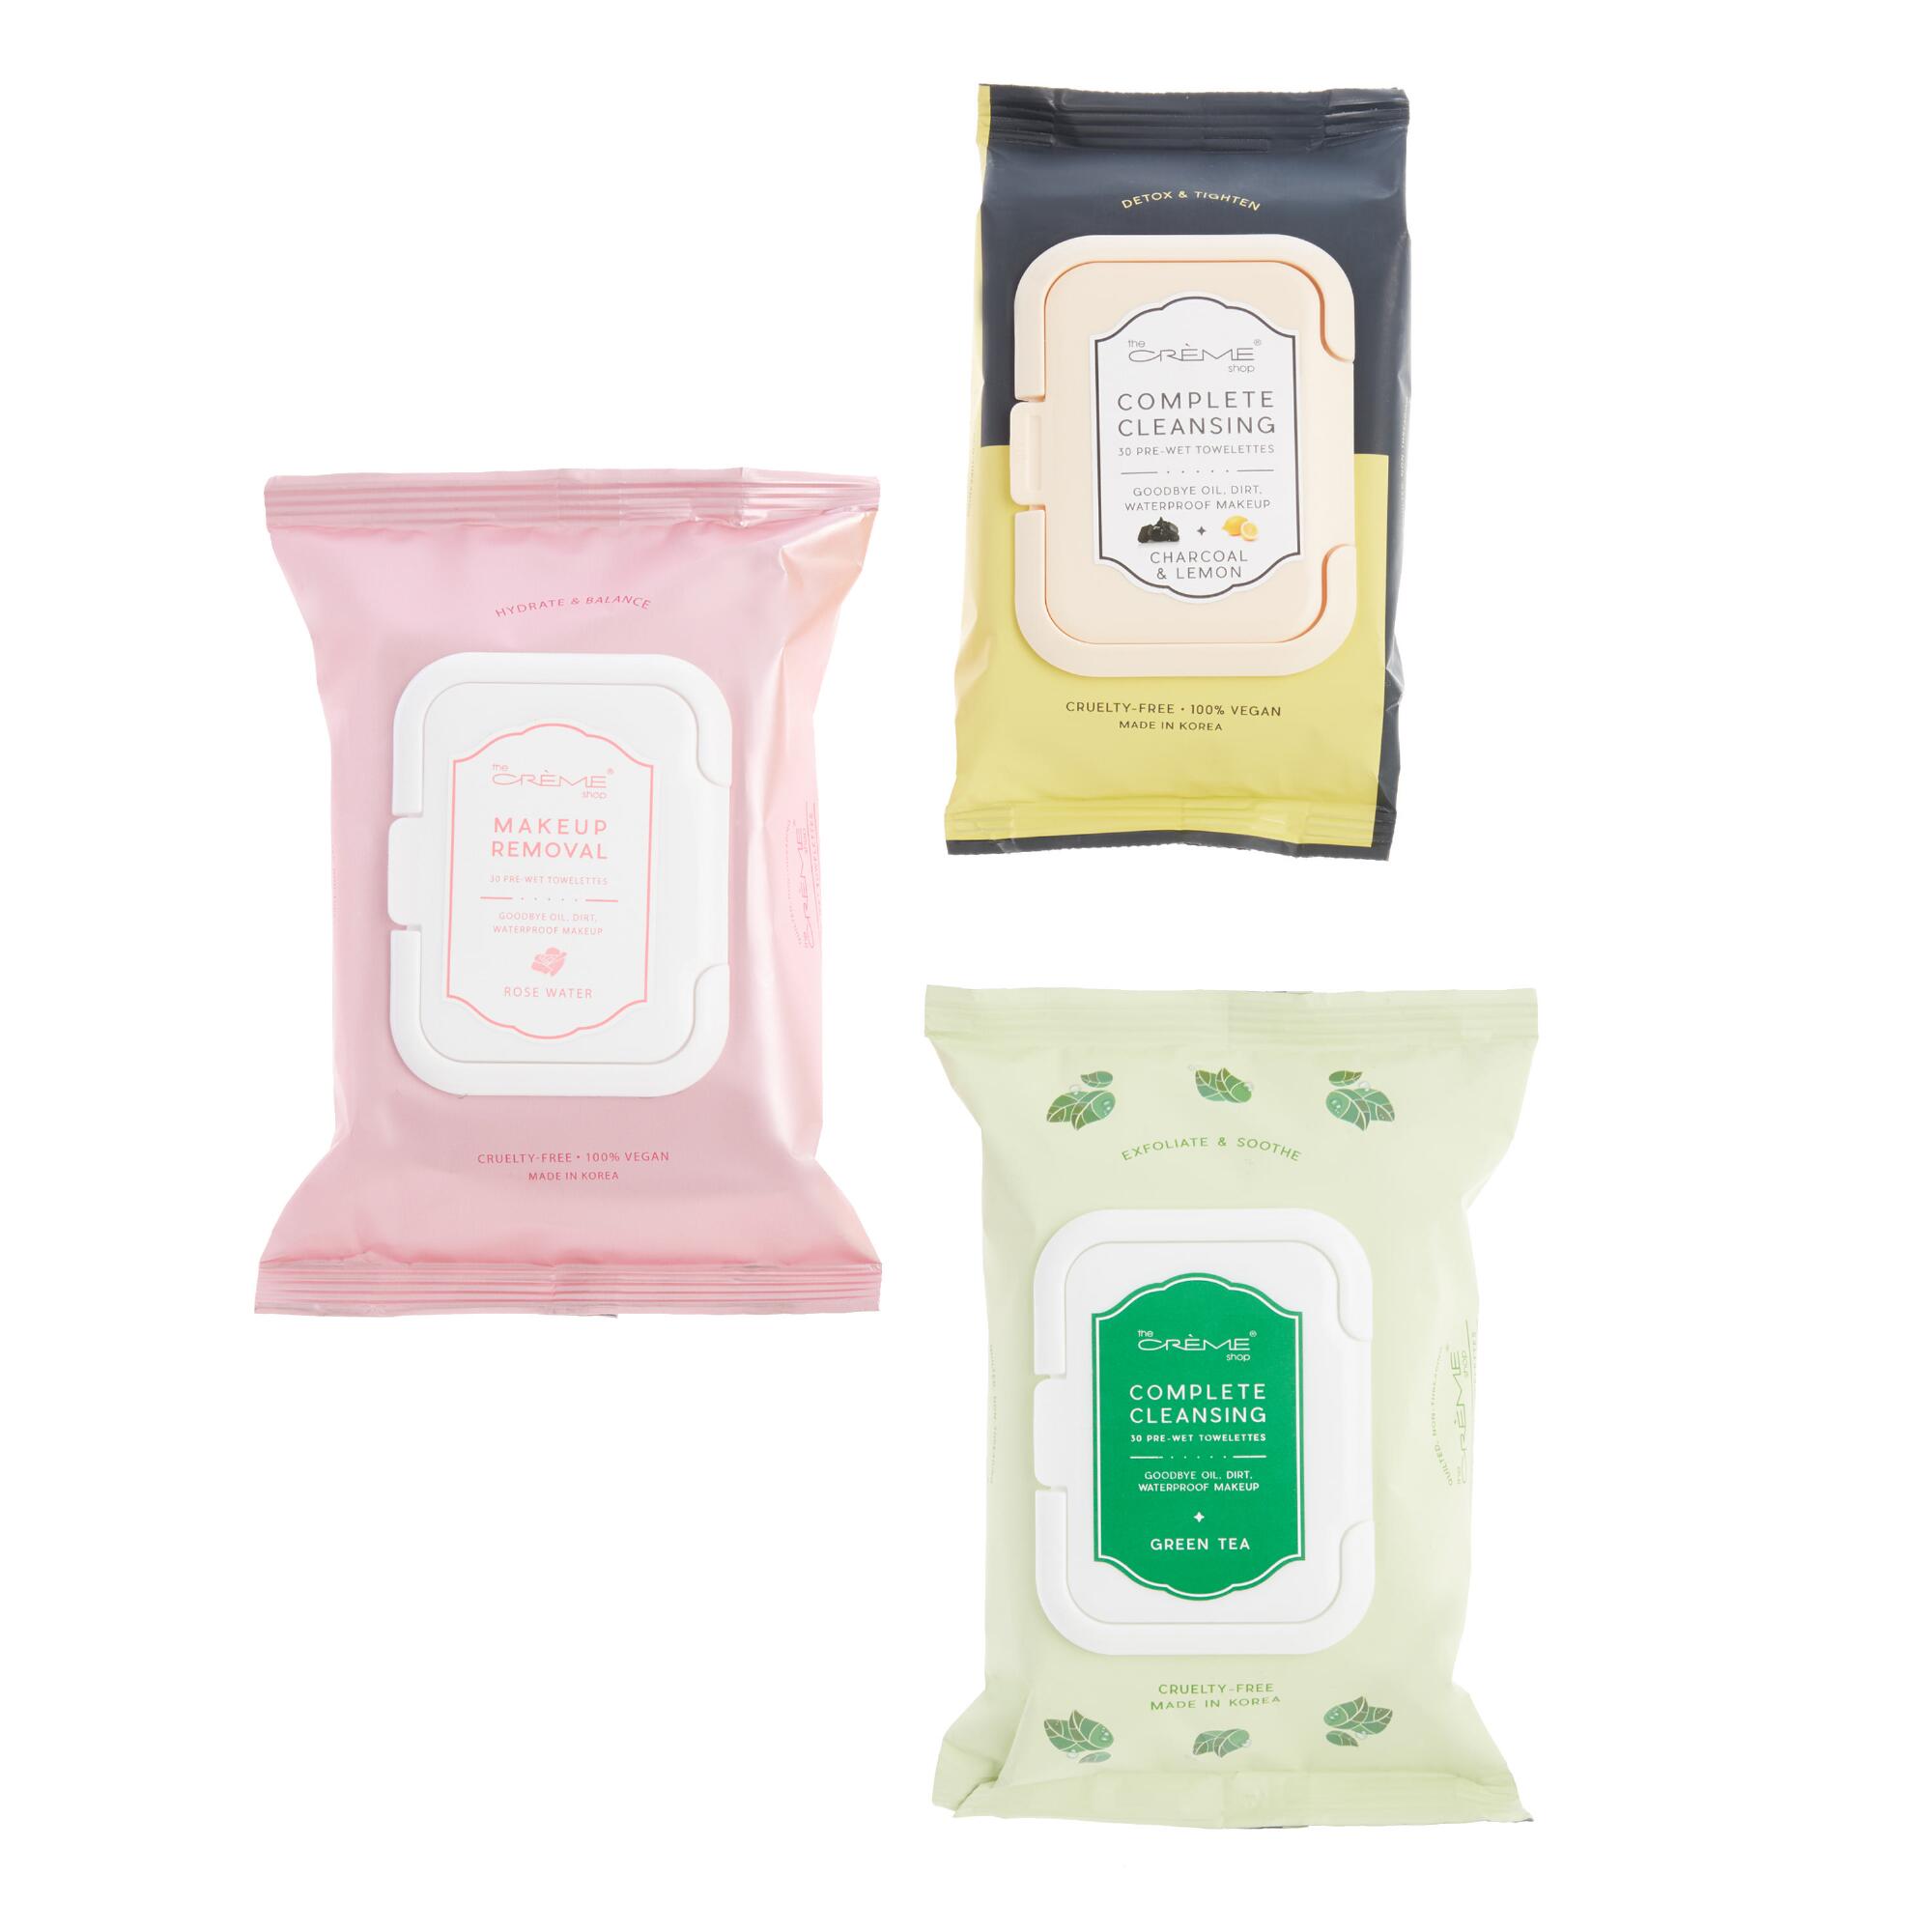 Creme Shop Korean Beauty Facial Cleansing Wipes Collection by World Market